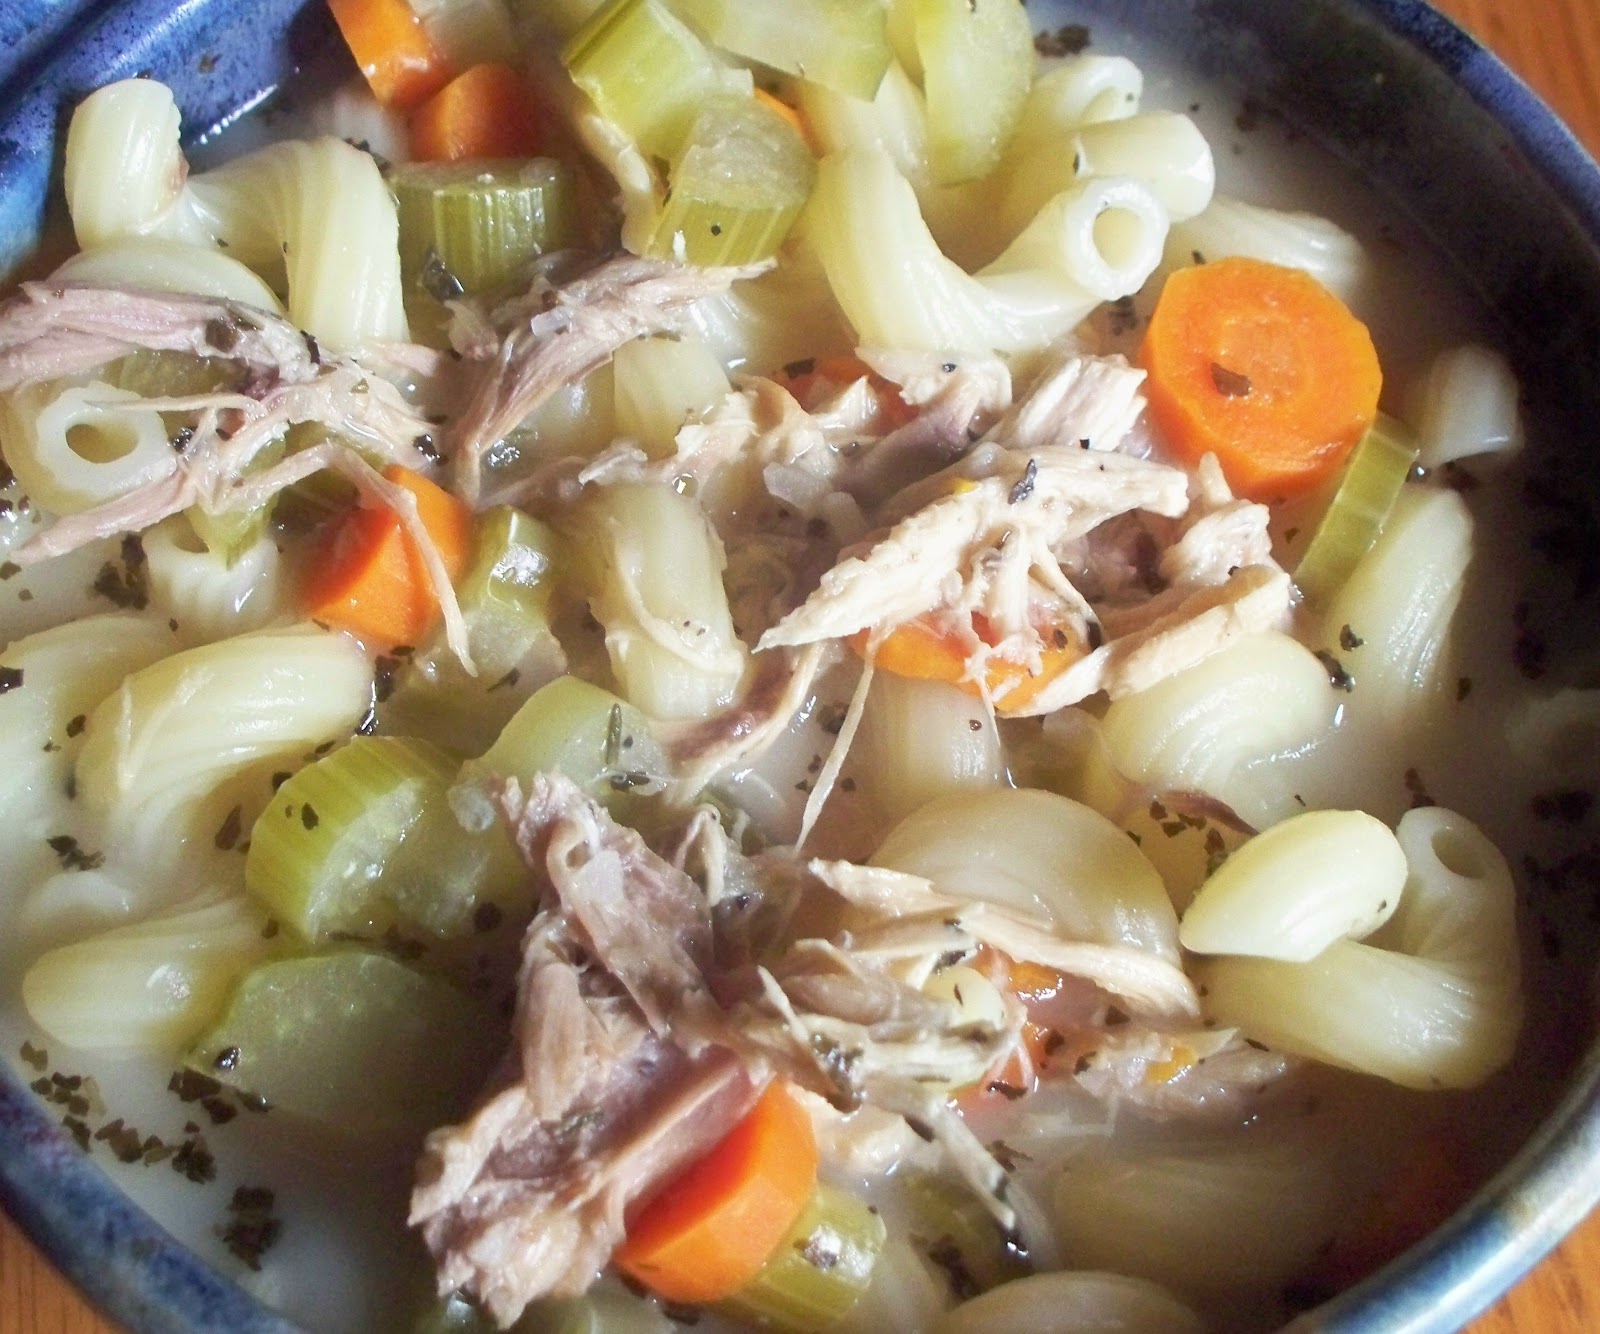 A New Leaf: In the Kitchen with Jason: Creamy Crockpot Chicken Noodle Soup